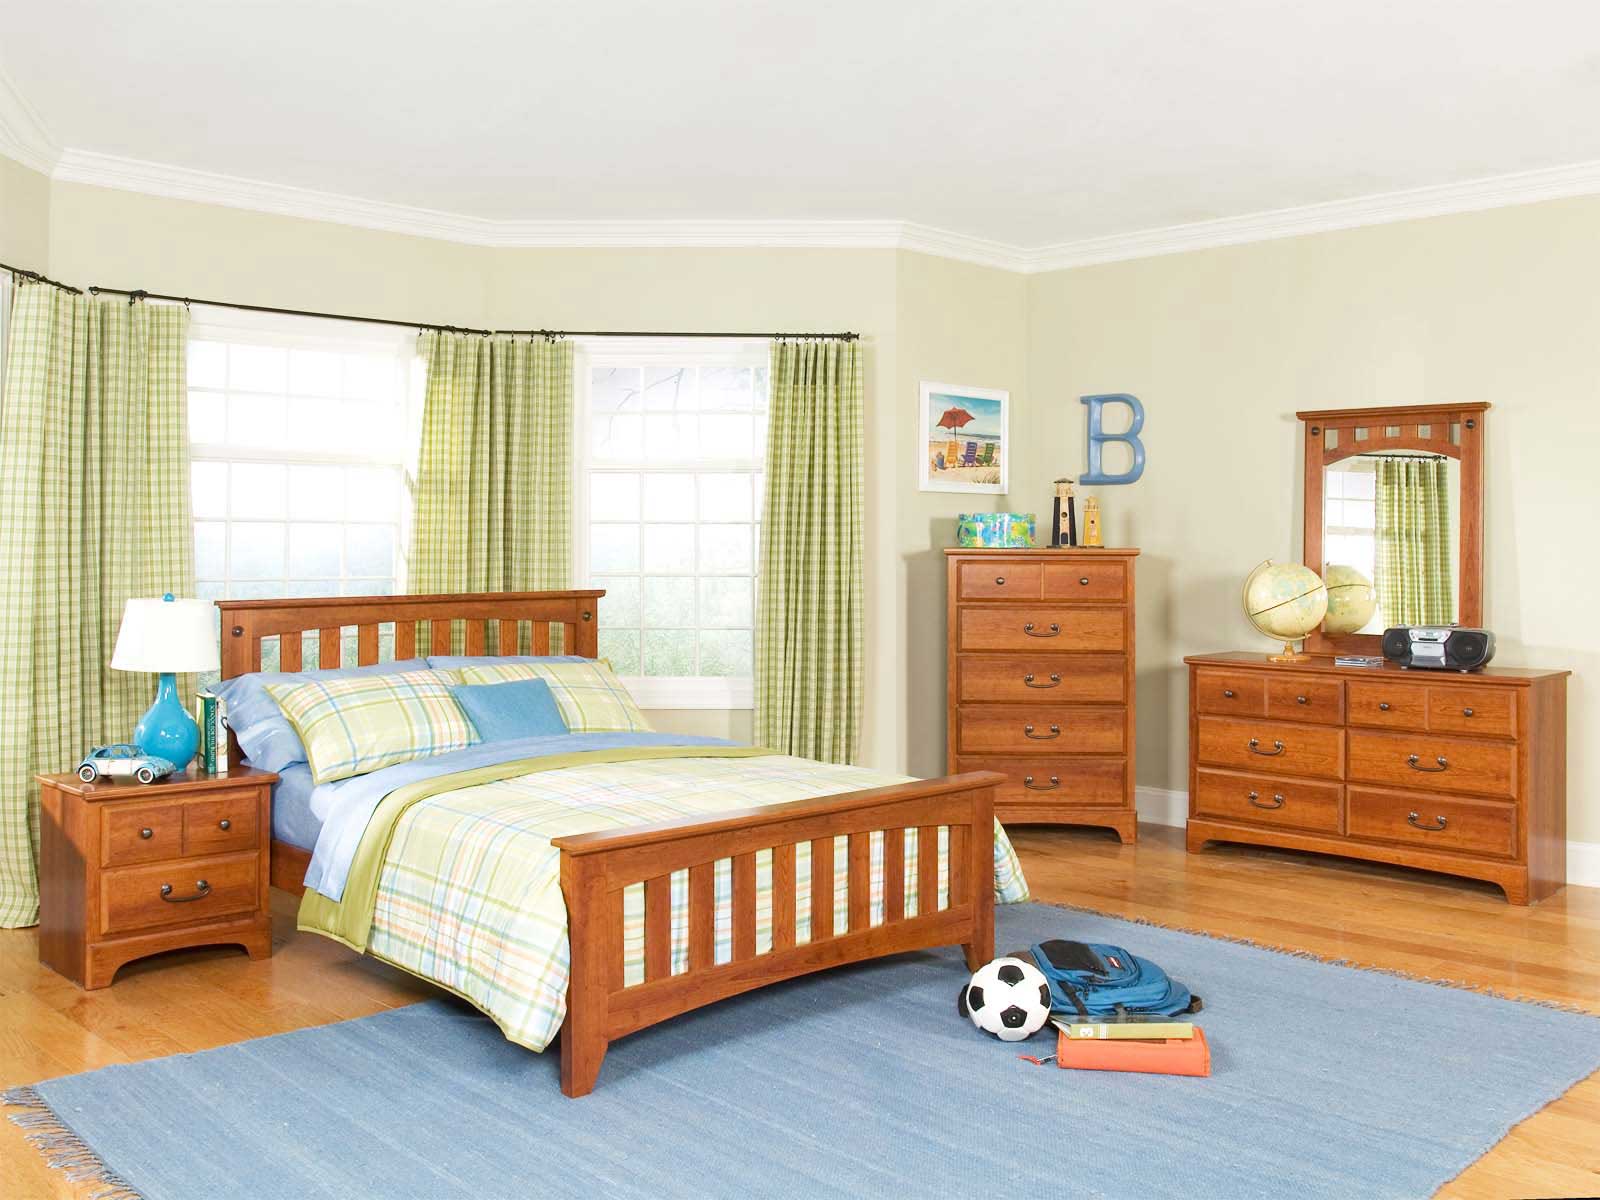 Contemporary Kids Set Classic Contemporary Kids Bedroom Furniture Set And Laminate Flooring Kids Bedroom Design Also Aquamarine Fur Rug Kids Bedroom Flooring With Lamp Table And Small Mirror Decoration Design Ideas Bedroom Kids Bedroom Sets: Combining The Color Ideas